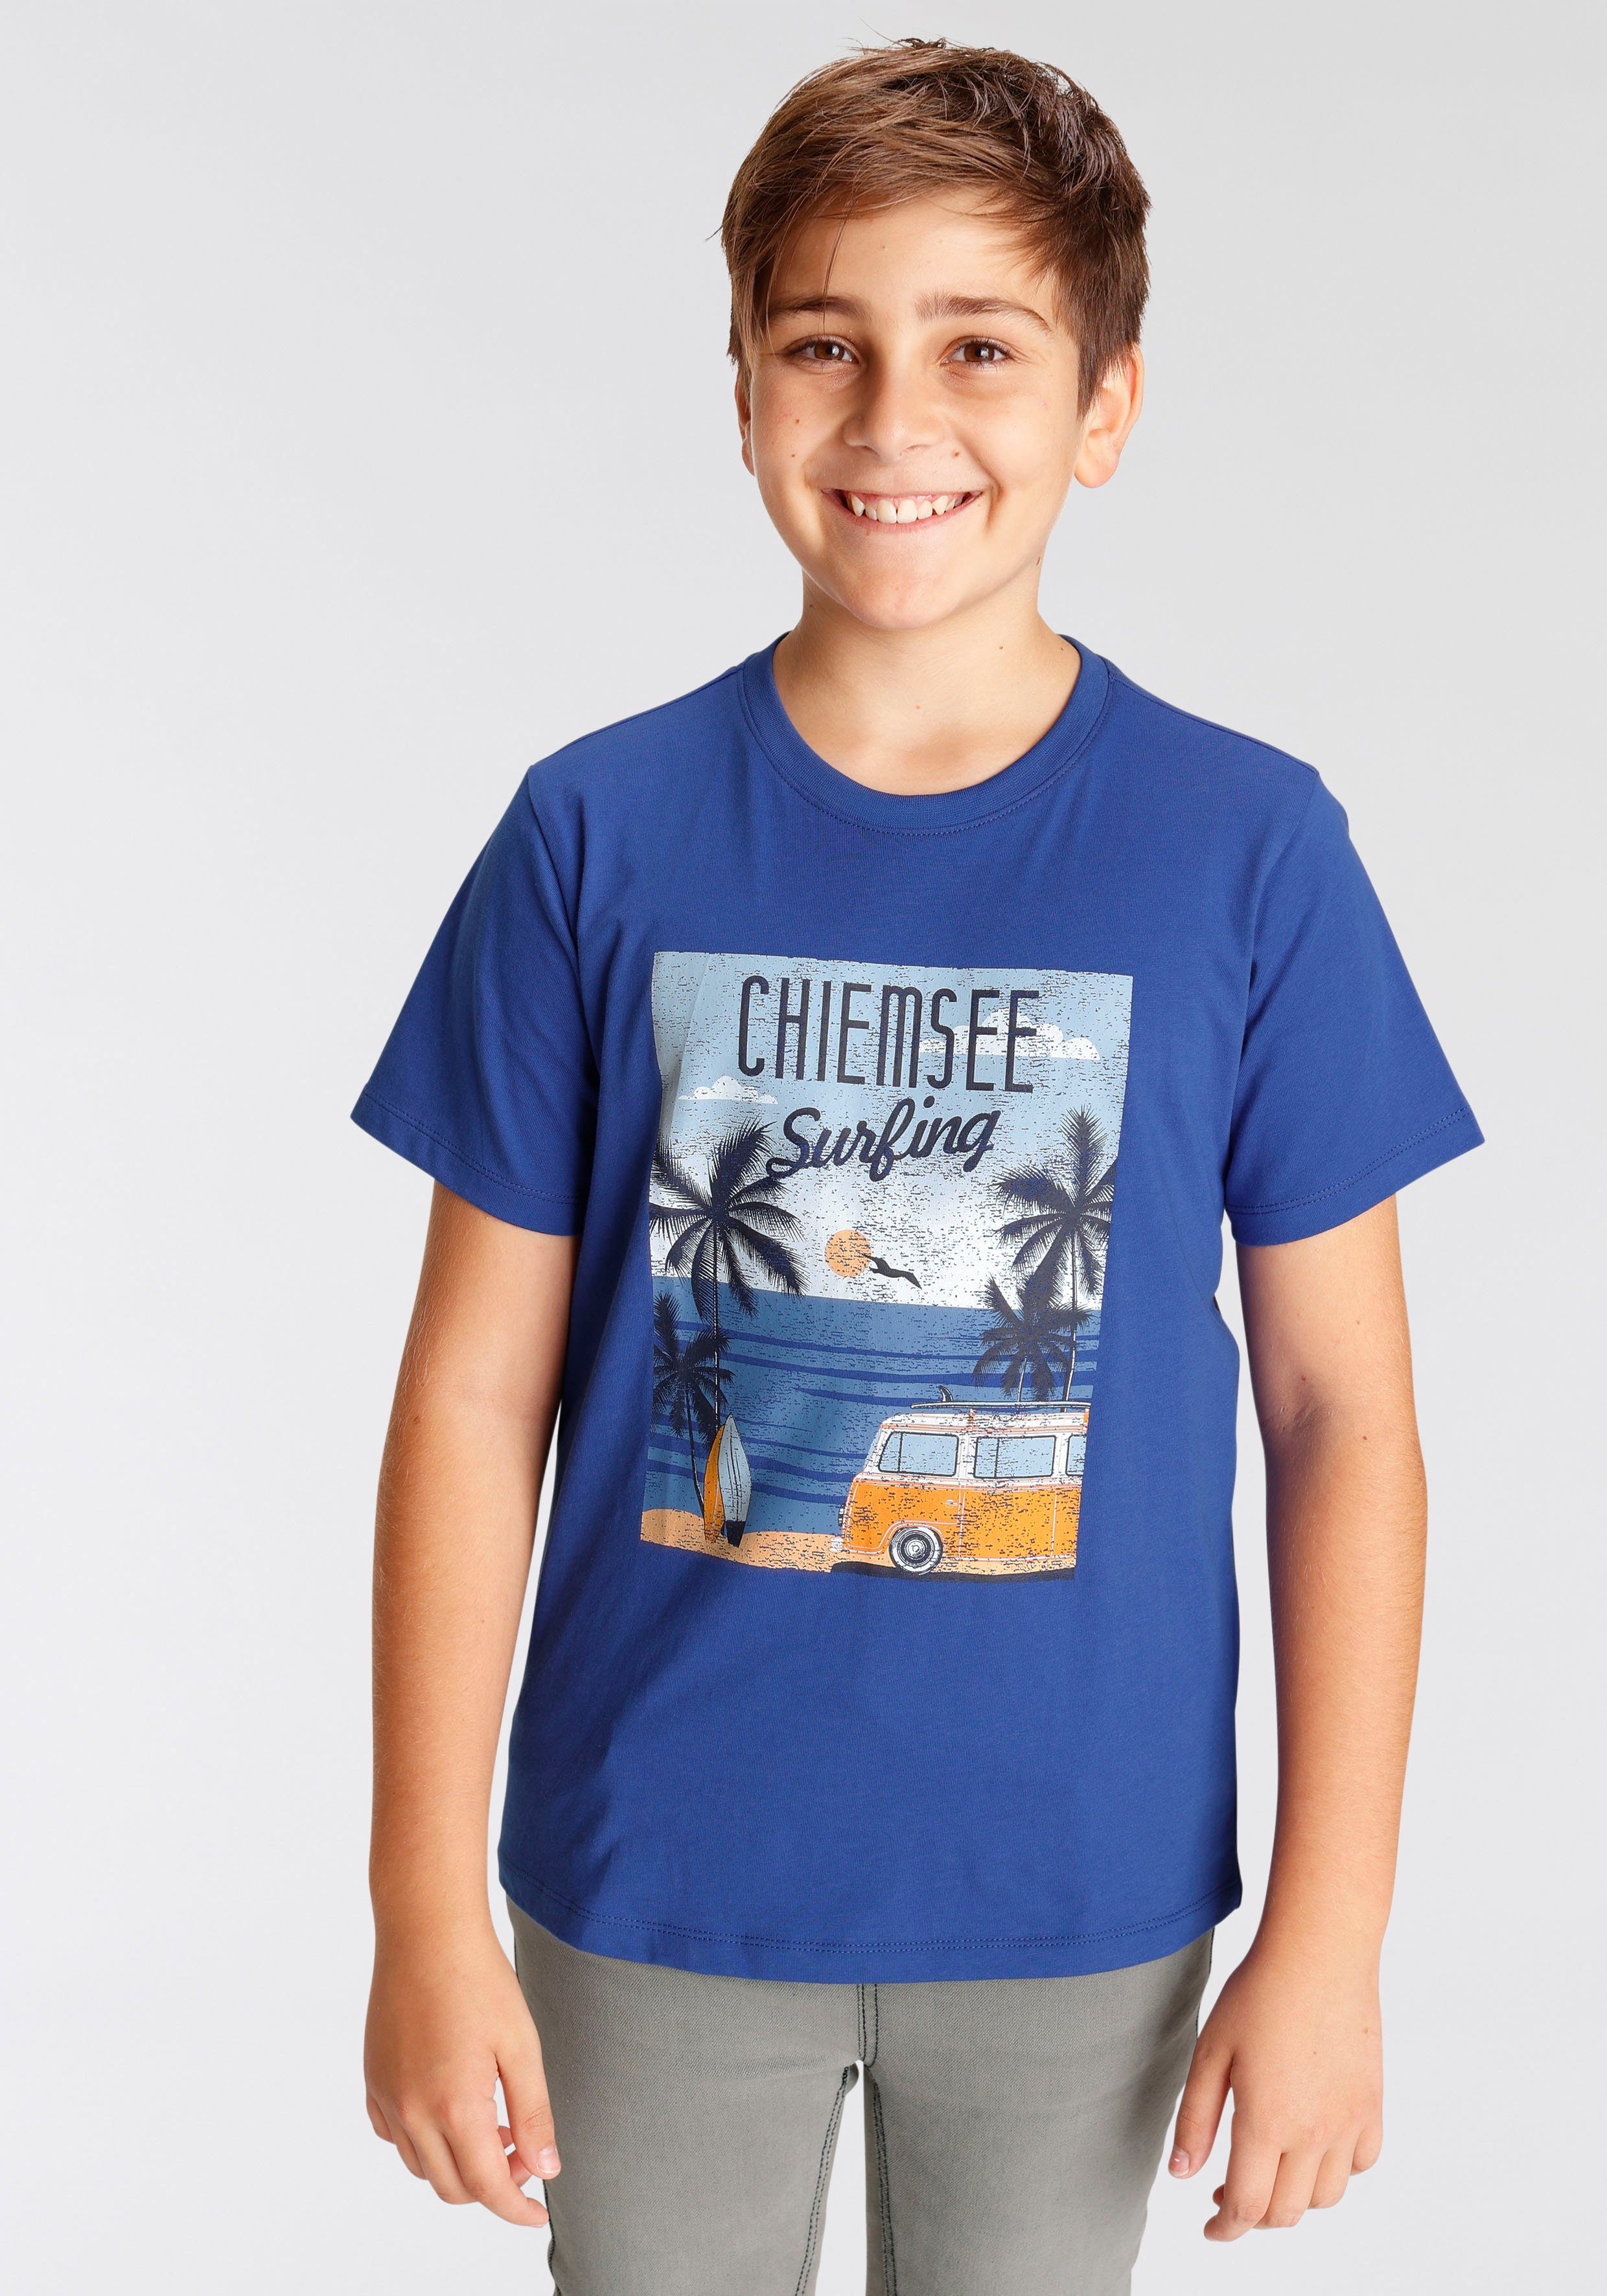 Chiemsee T-Shirt Surfing | T-Shirts